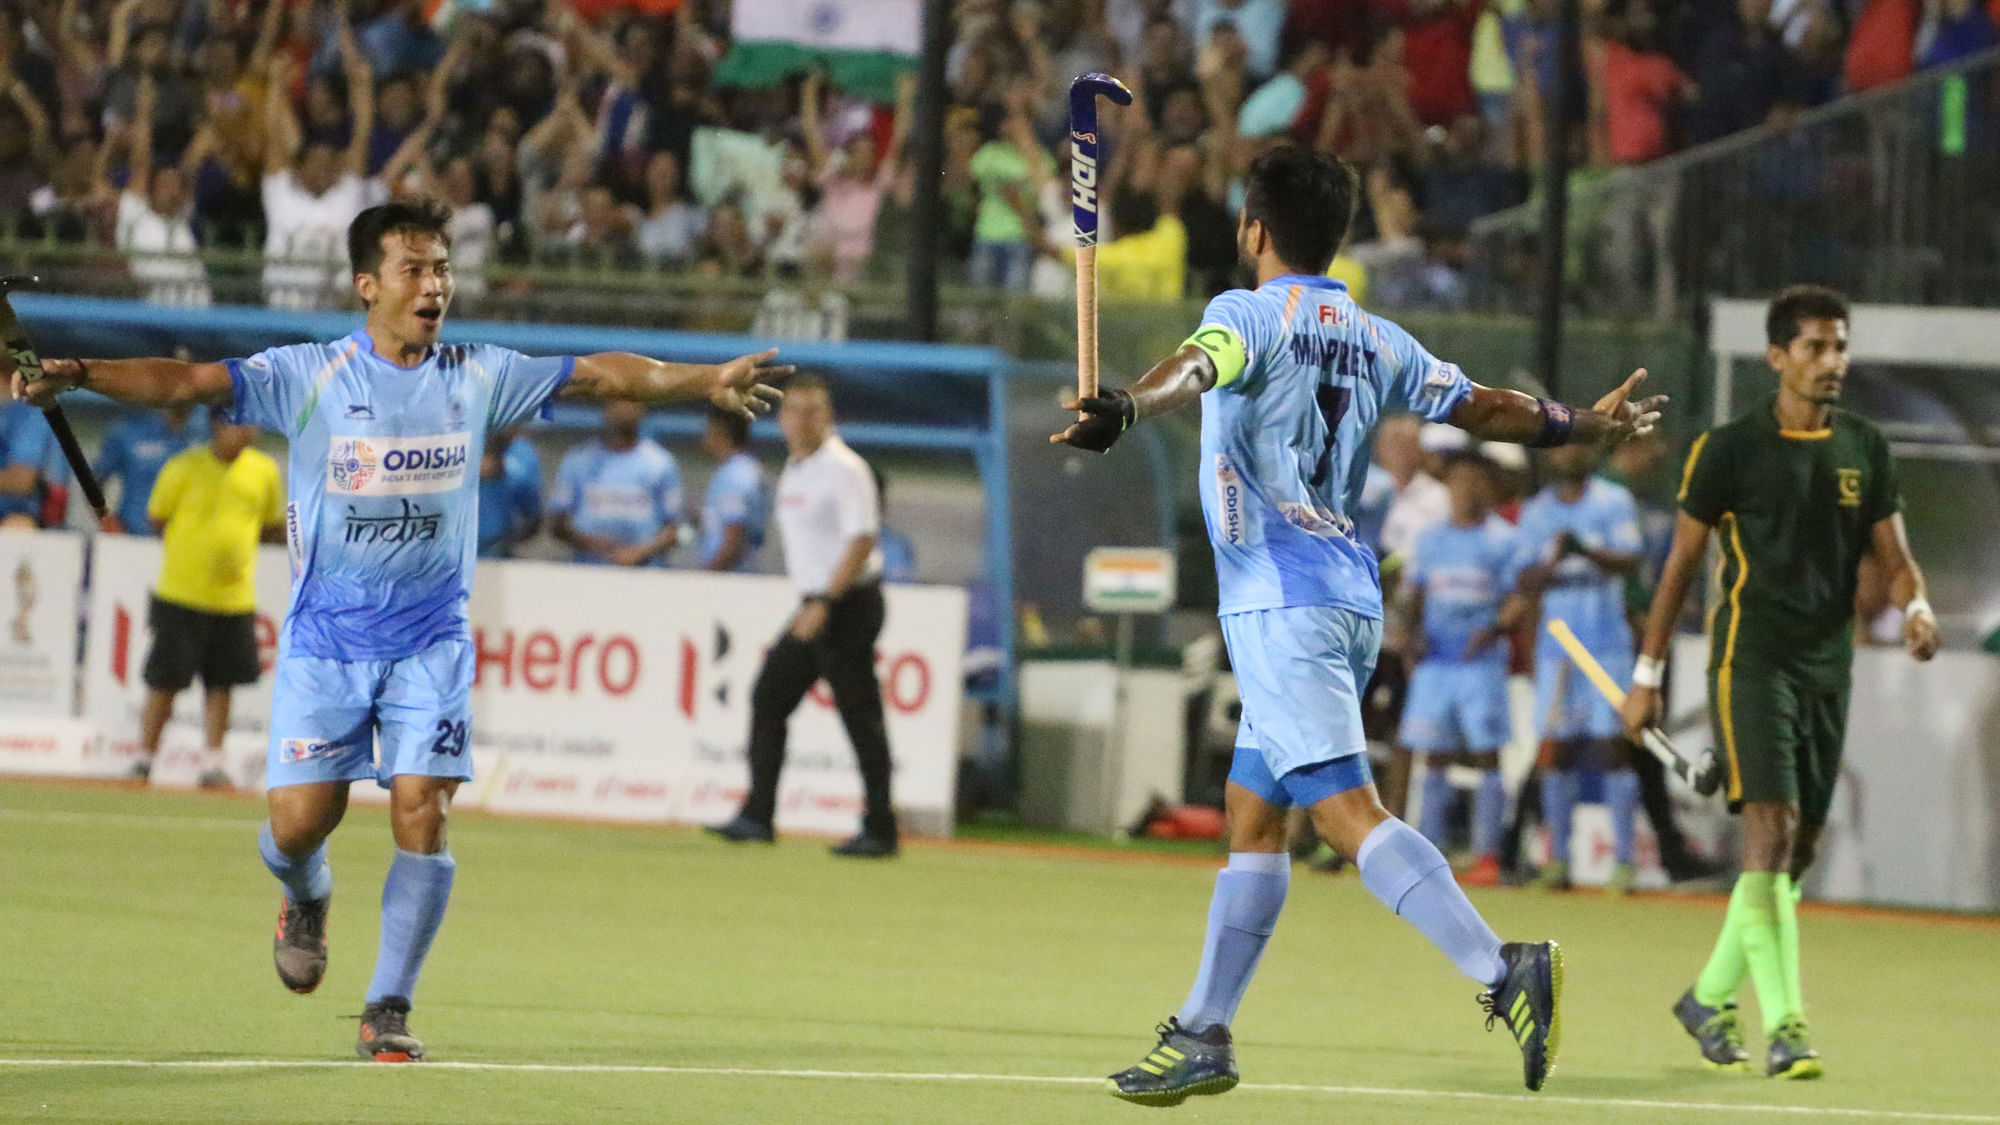 Indian men’s hockey team came from a goal down to defeat Pakistan 3-1 in their second Asian Champions Trophy match.